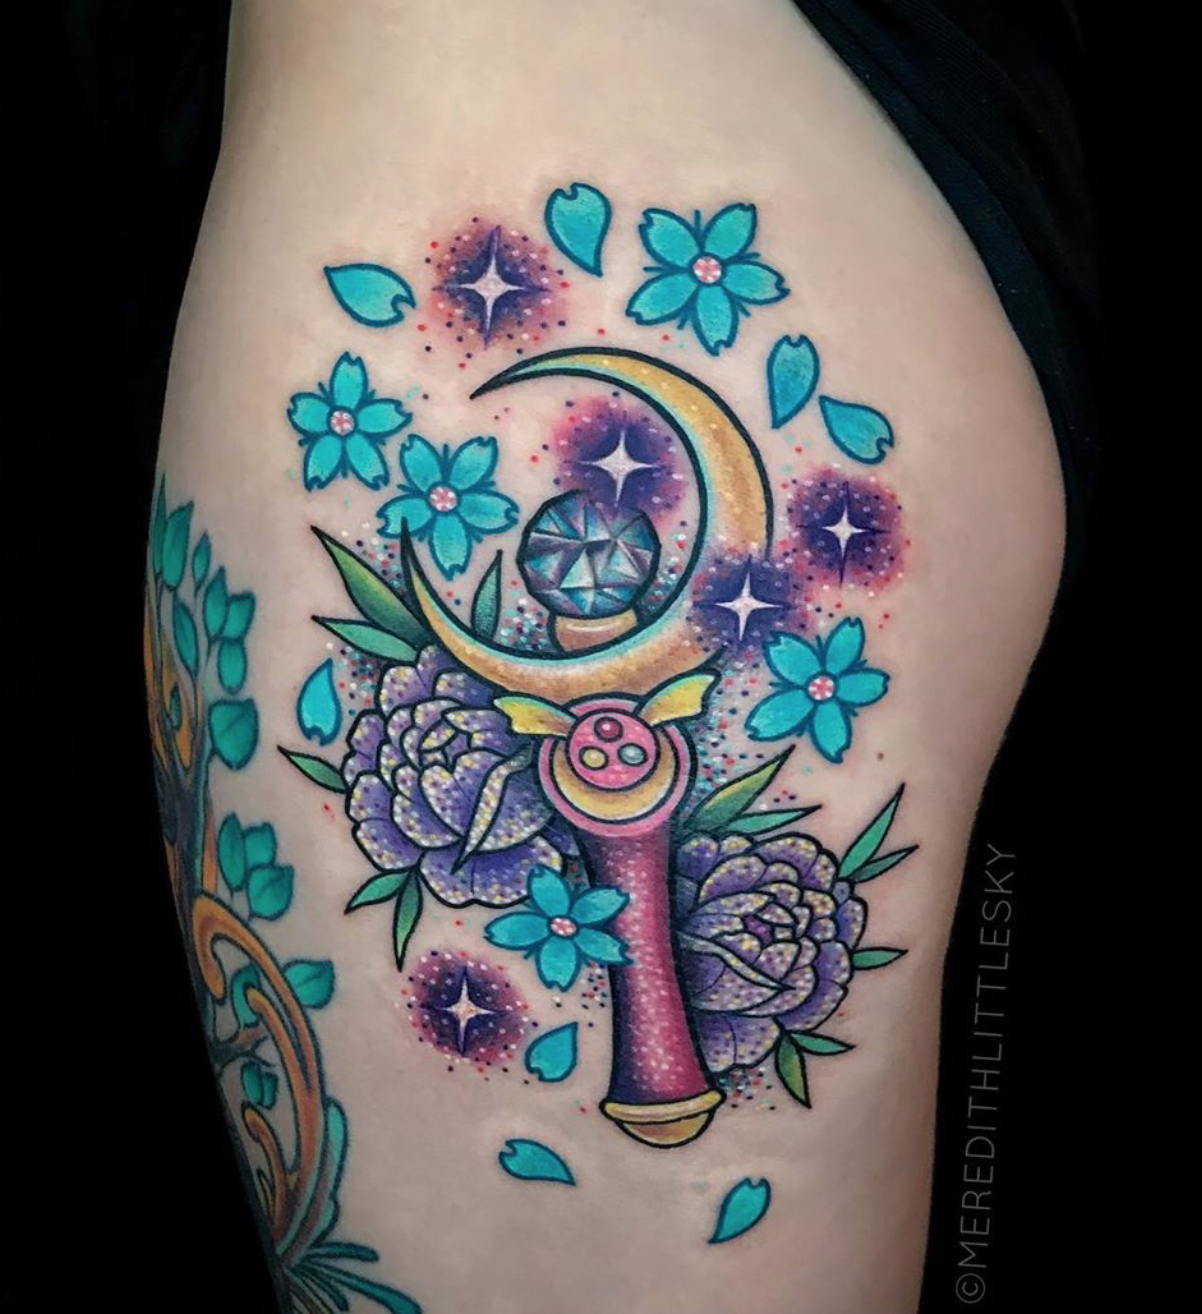 Wand tattoo by Meredith Little Sky